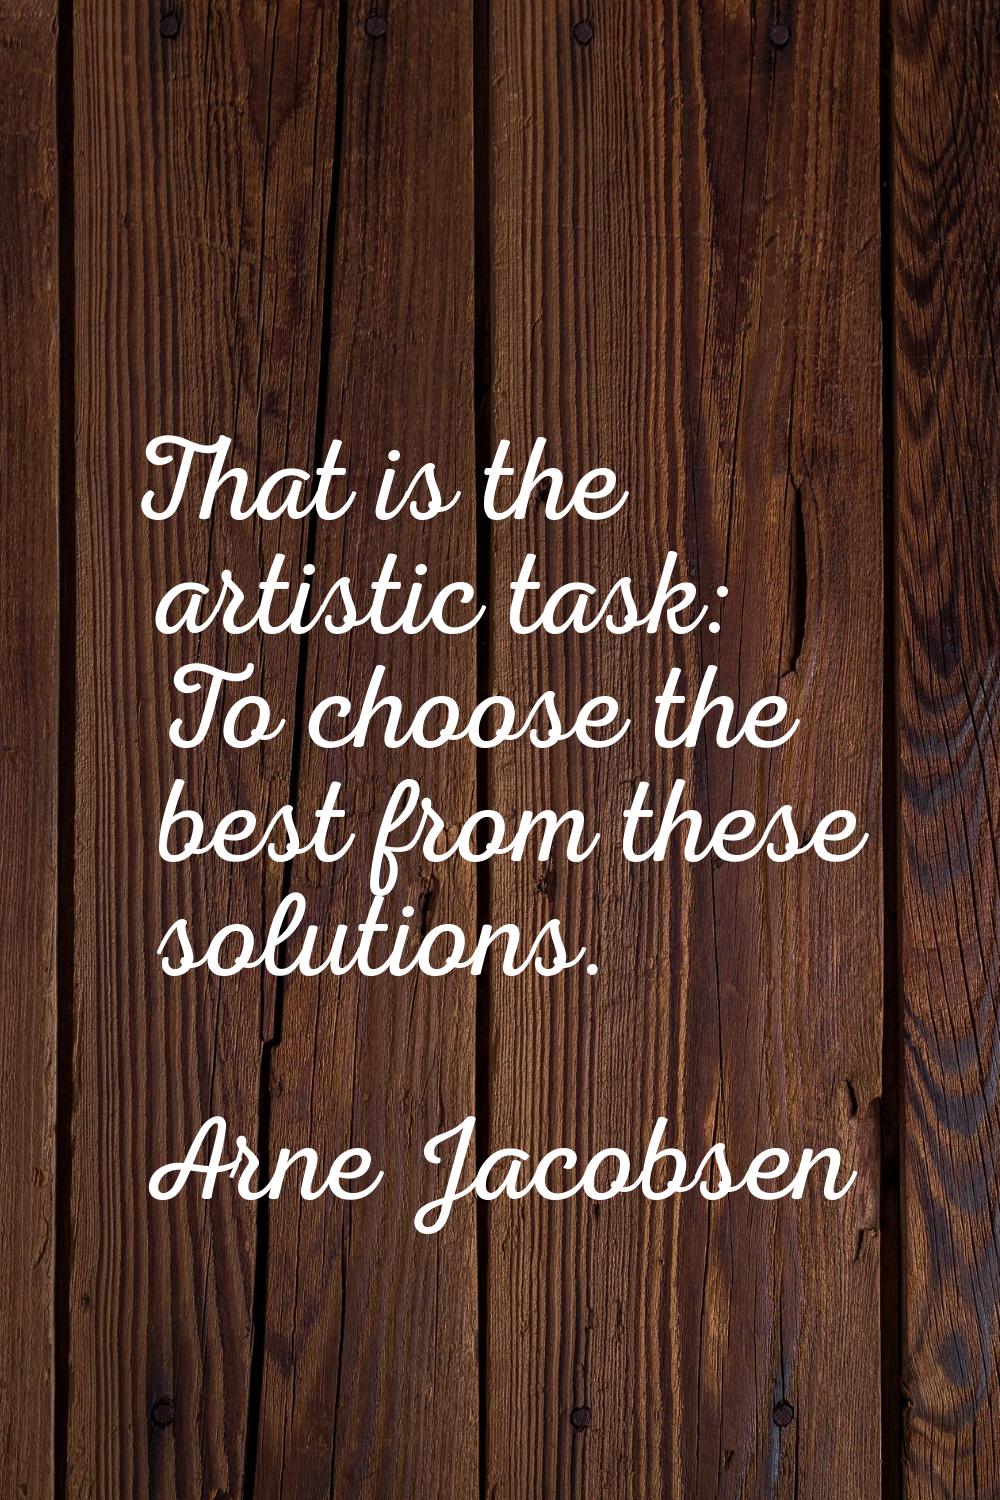 That is the artistic task: To choose the best from these solutions.